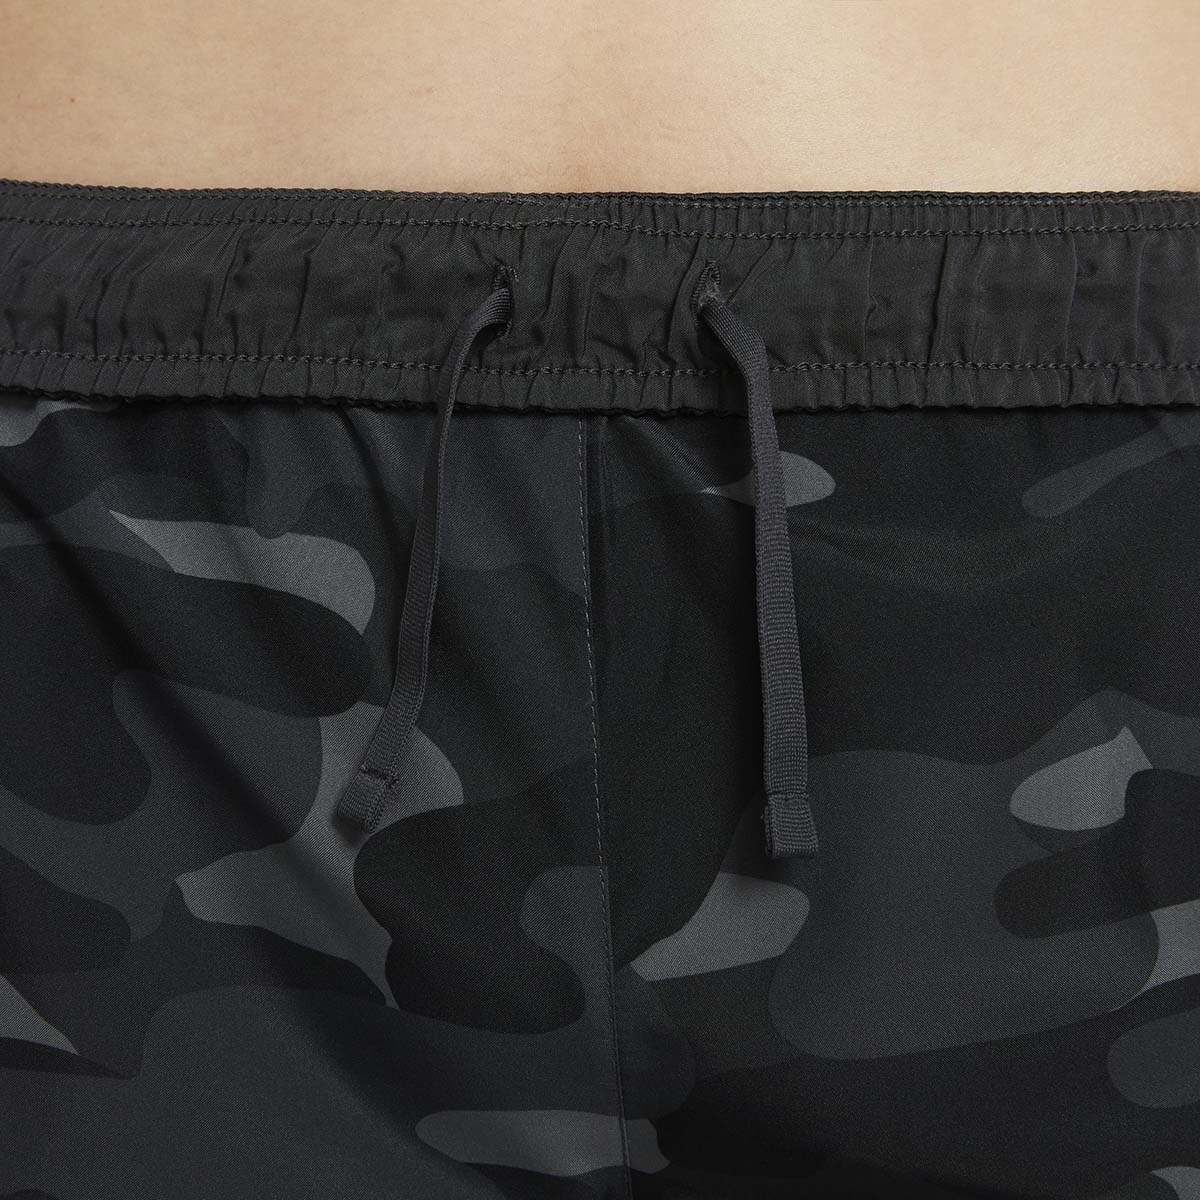 Nike Dri-FIT Tempo Short, , large image number null